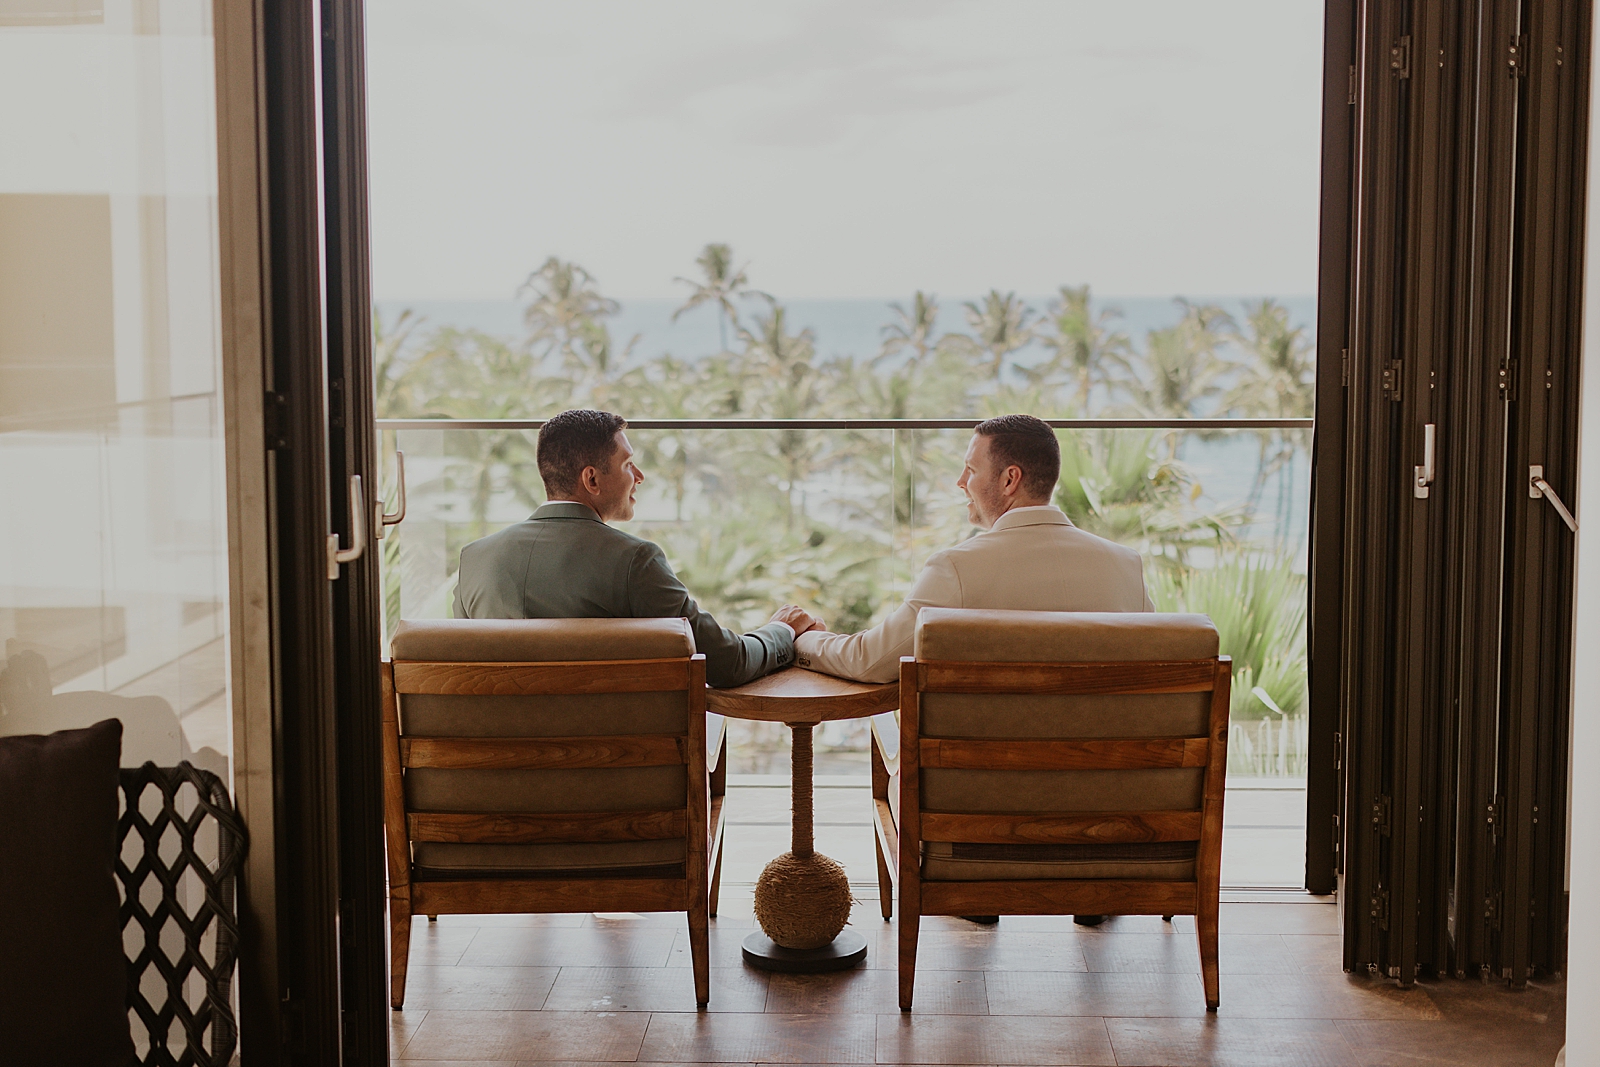 Grooms holding hands sitting on chairs looking out at the beach with palm trees